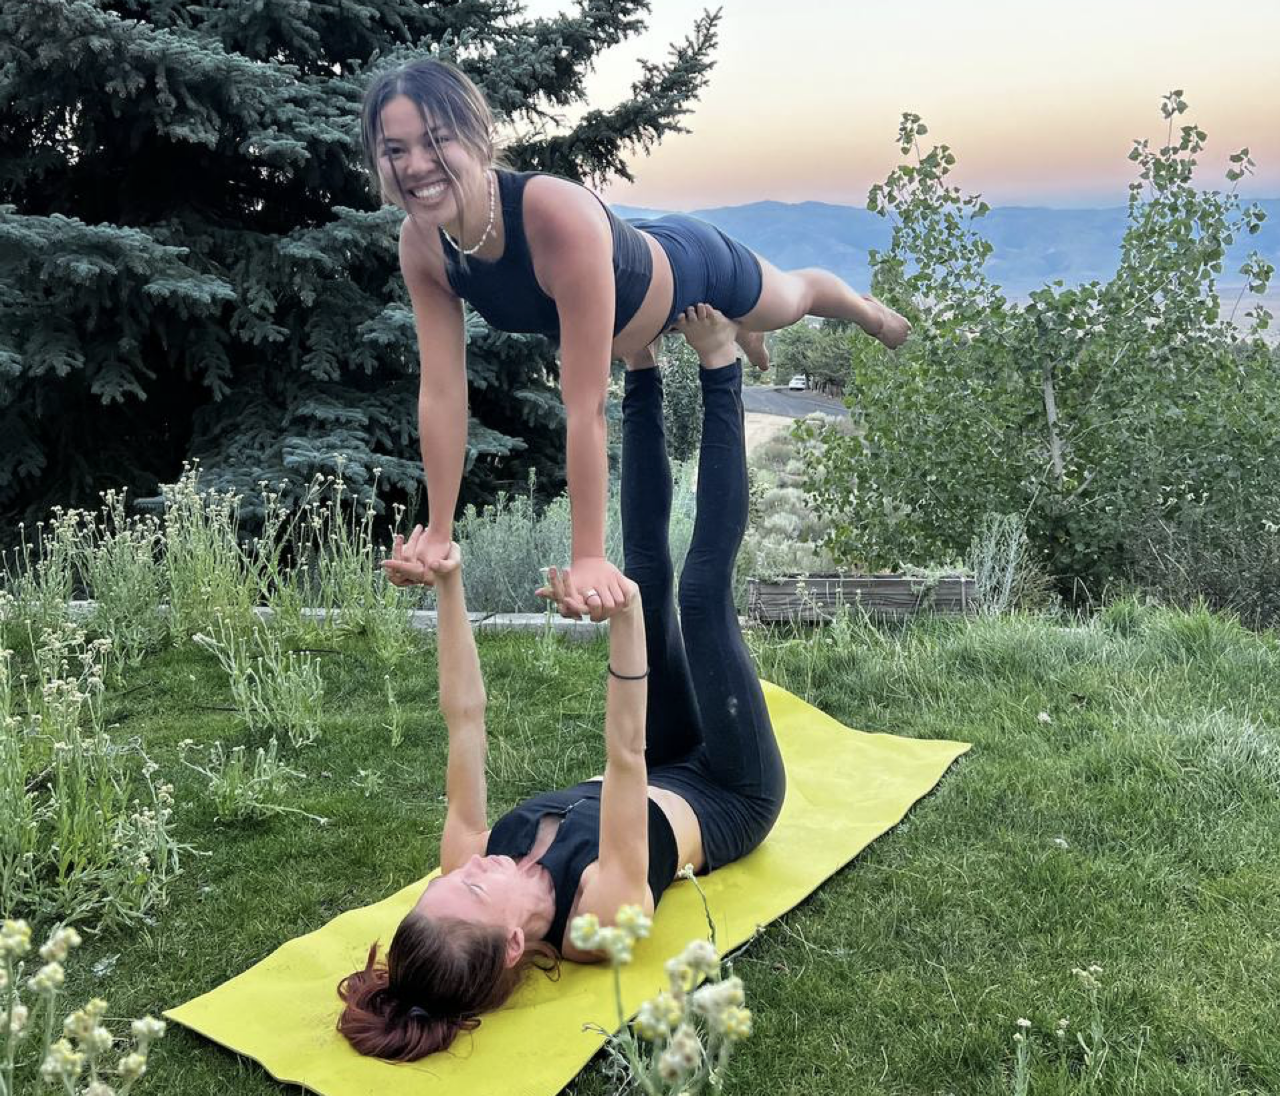 Kaela holding others up during an acroyoga session at Montaia